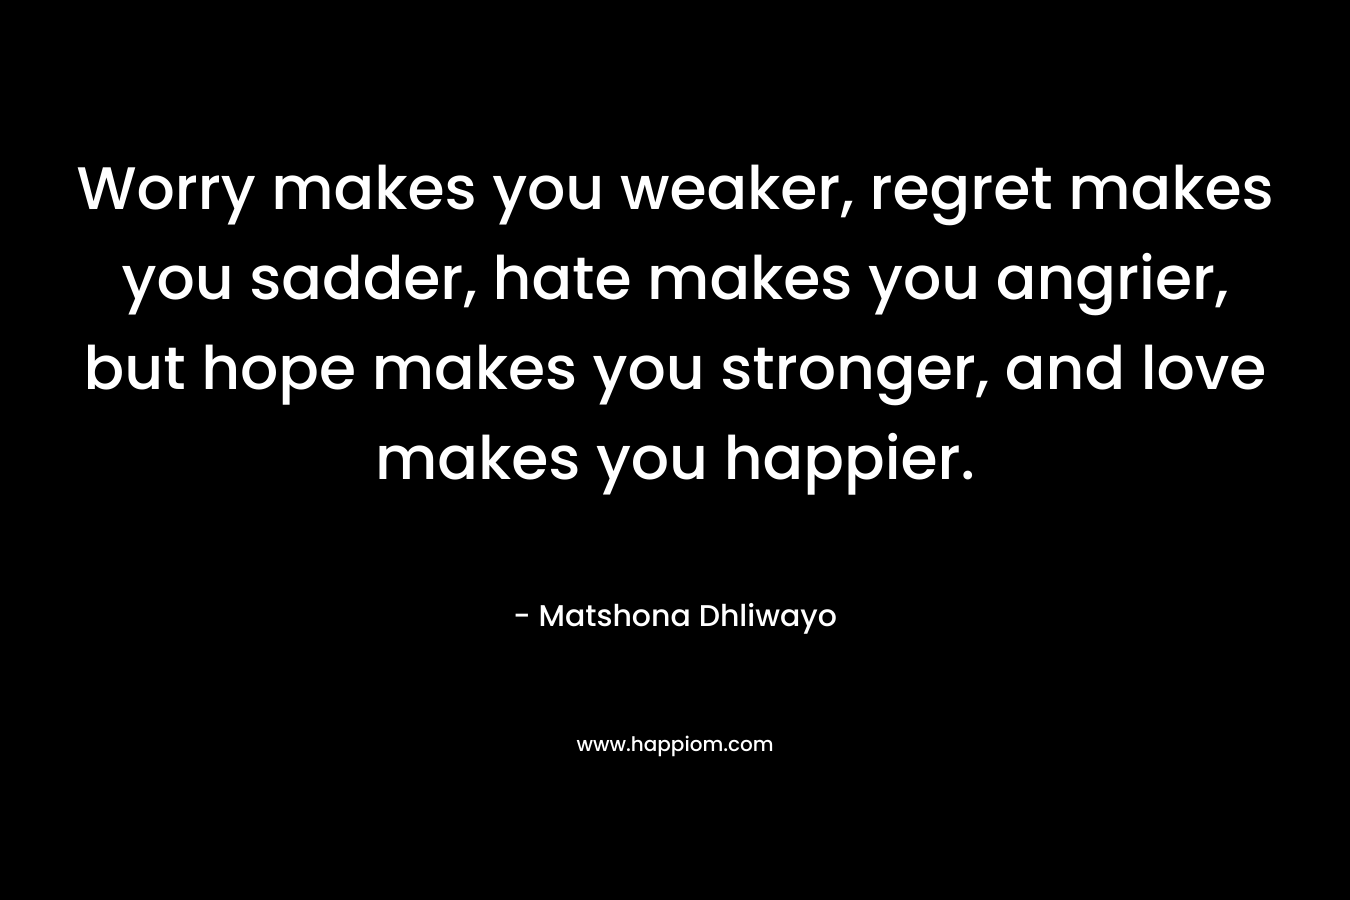 Worry makes you weaker, regret makes you sadder, hate makes you angrier, but hope makes you stronger, and love makes you happier. – Matshona Dhliwayo